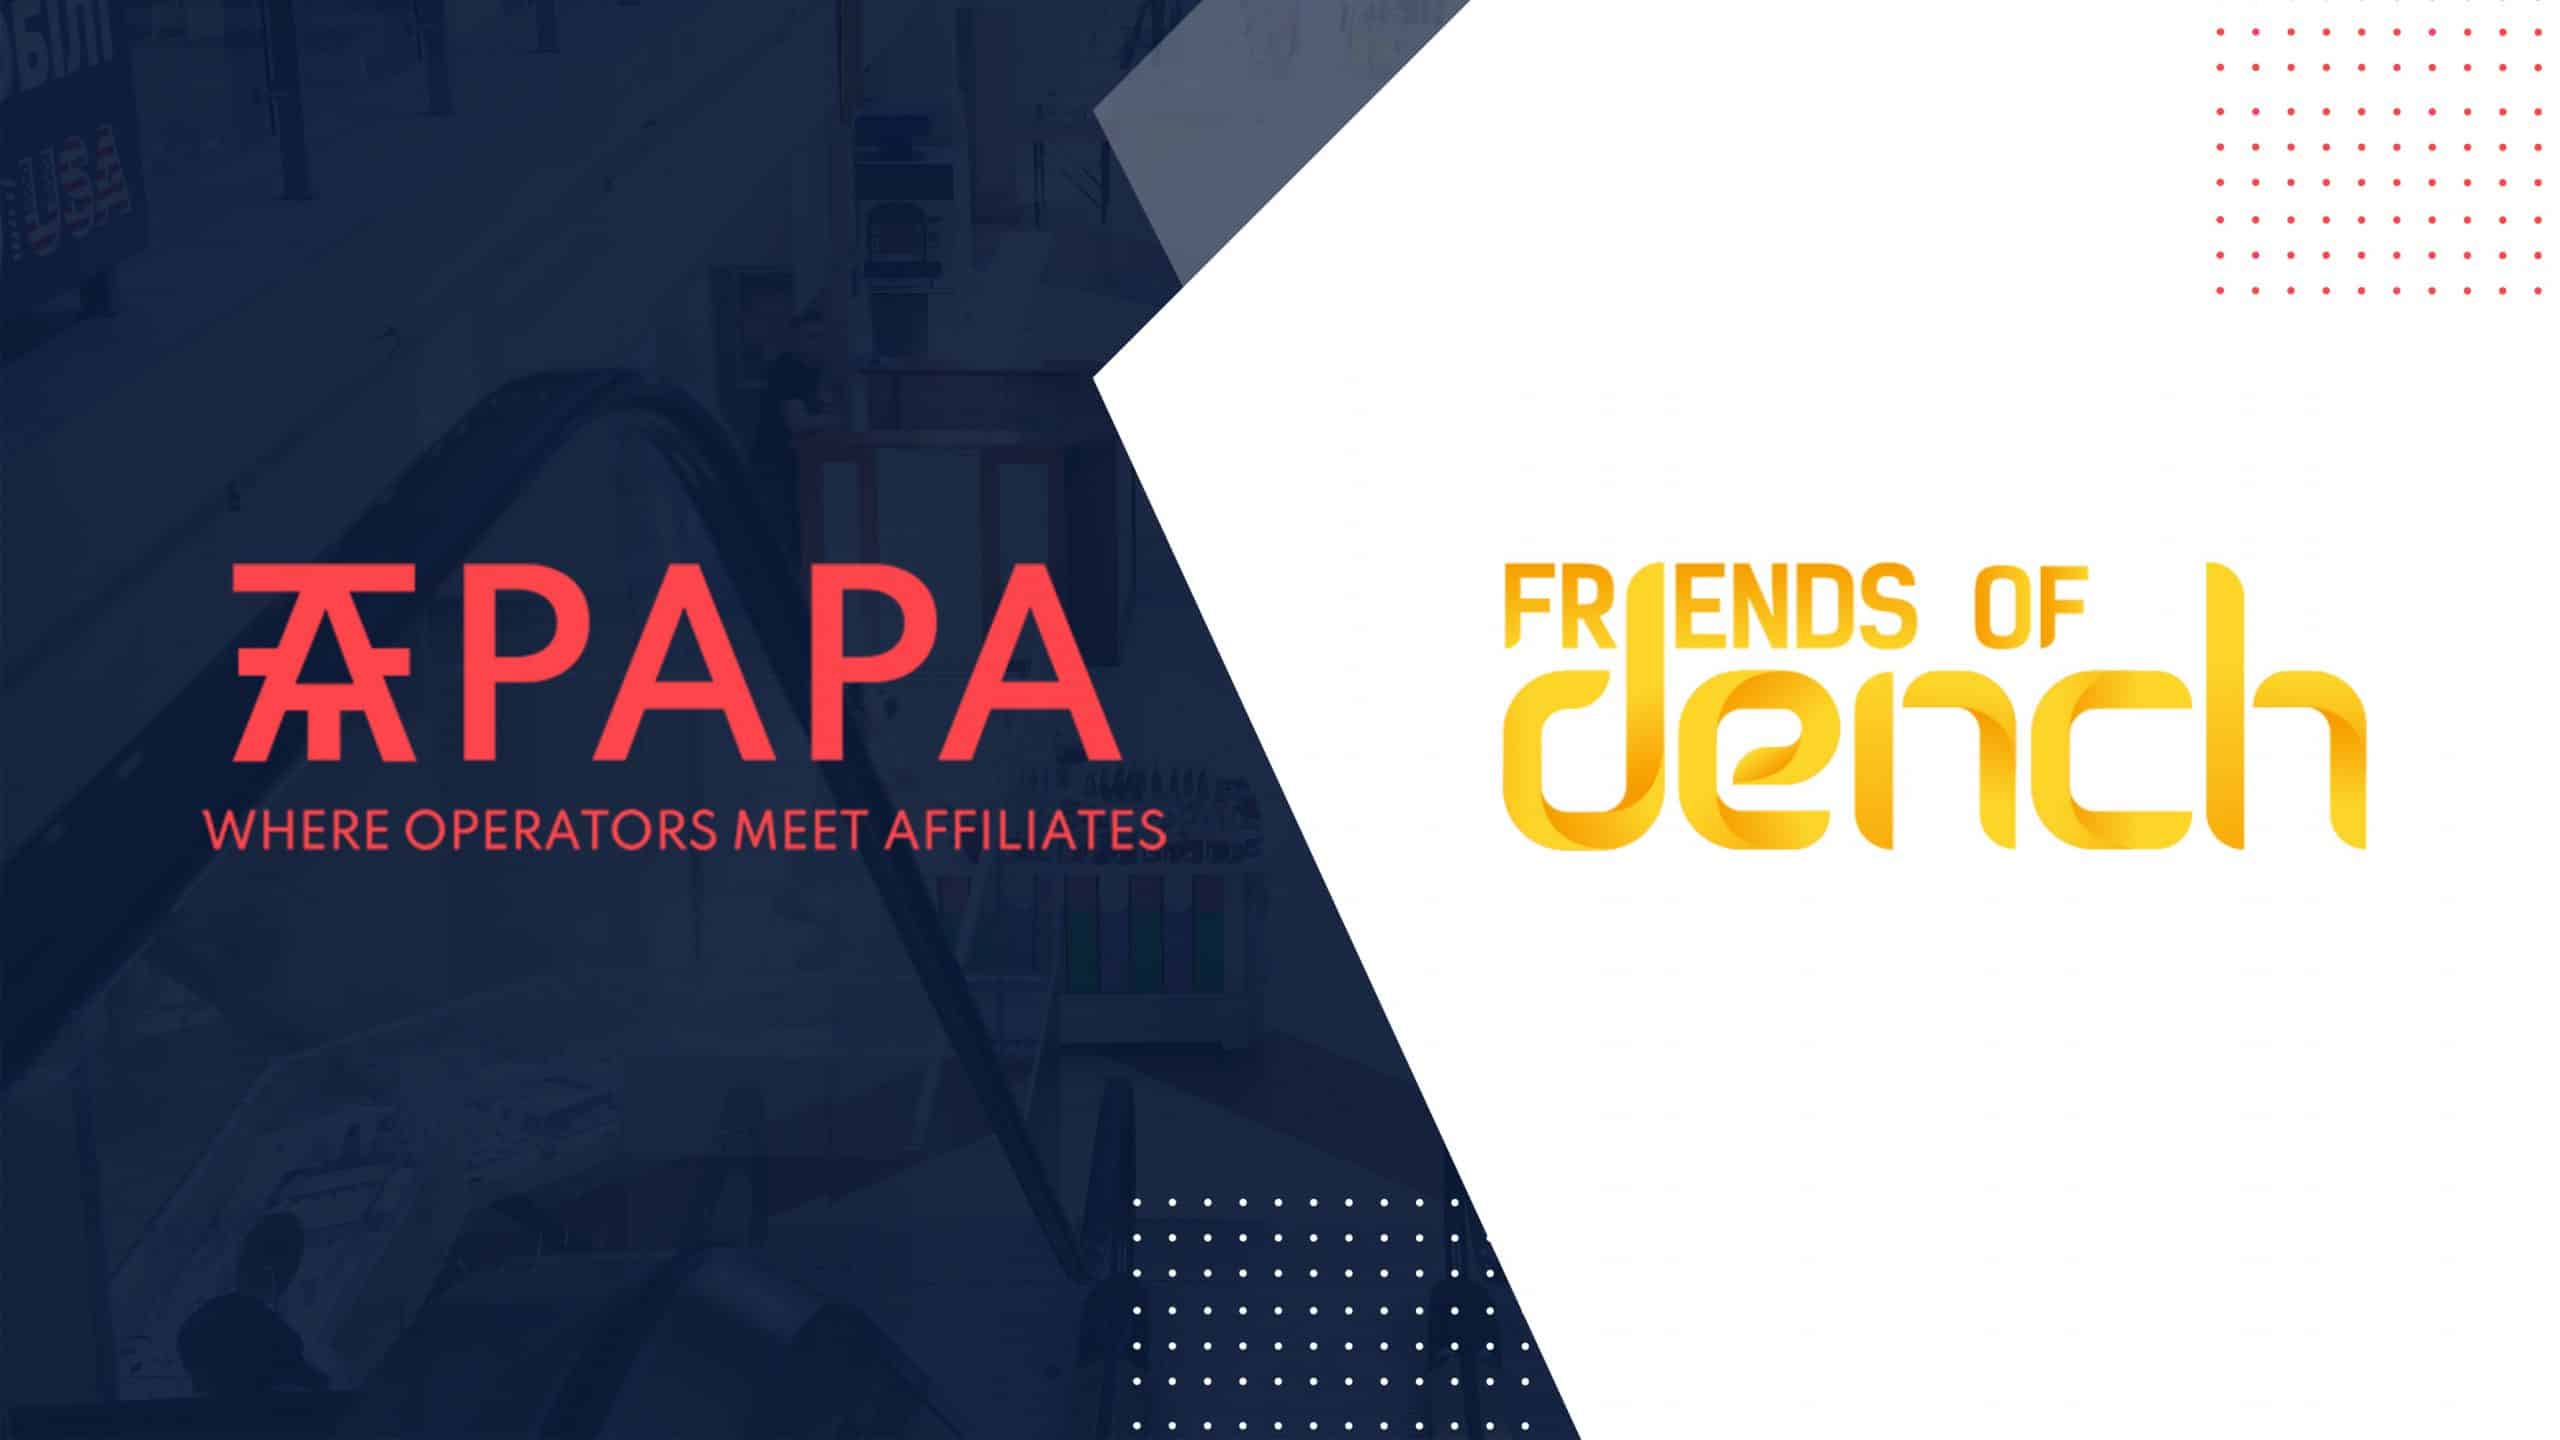 Friends of Dench launches on AffPapa